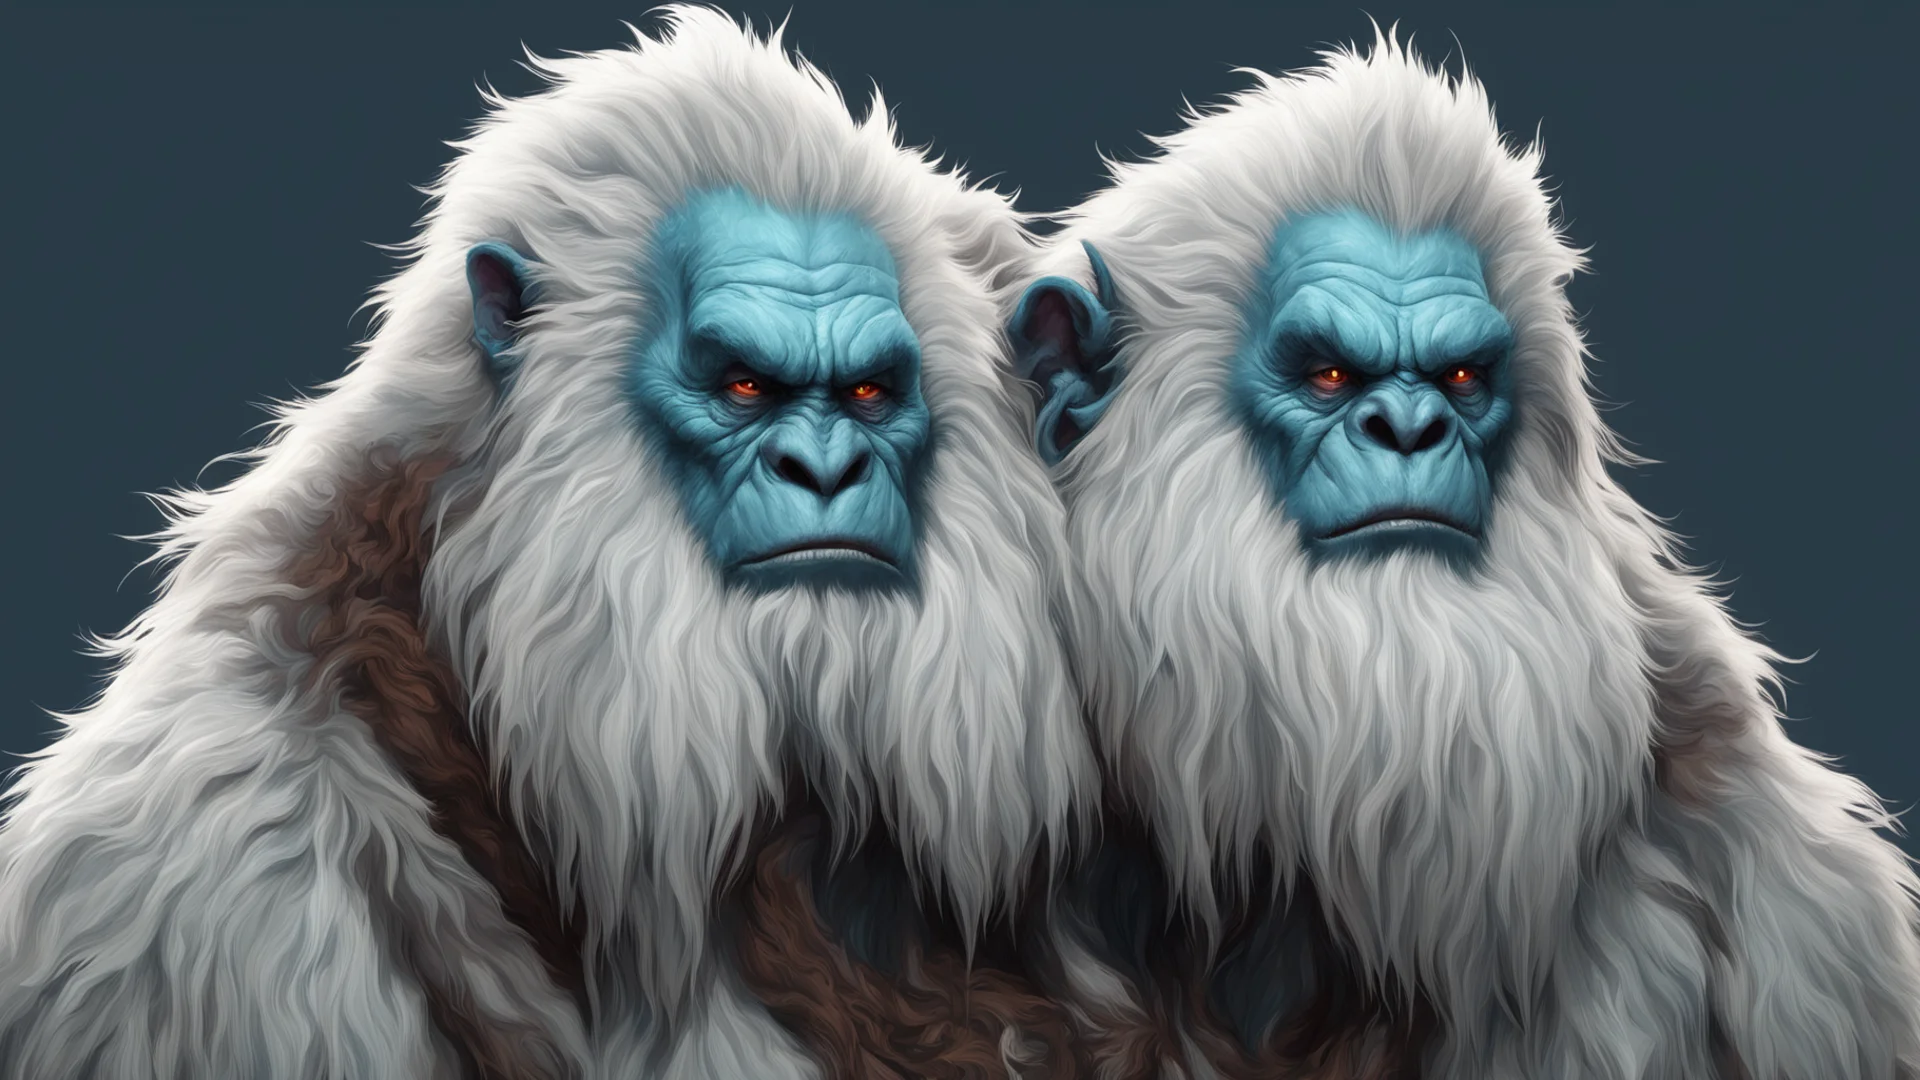 aiamazing the yeti king character design portrait designed by sawoozer akitipe studios craig mullins ar 23 awesome portrait 2 wide